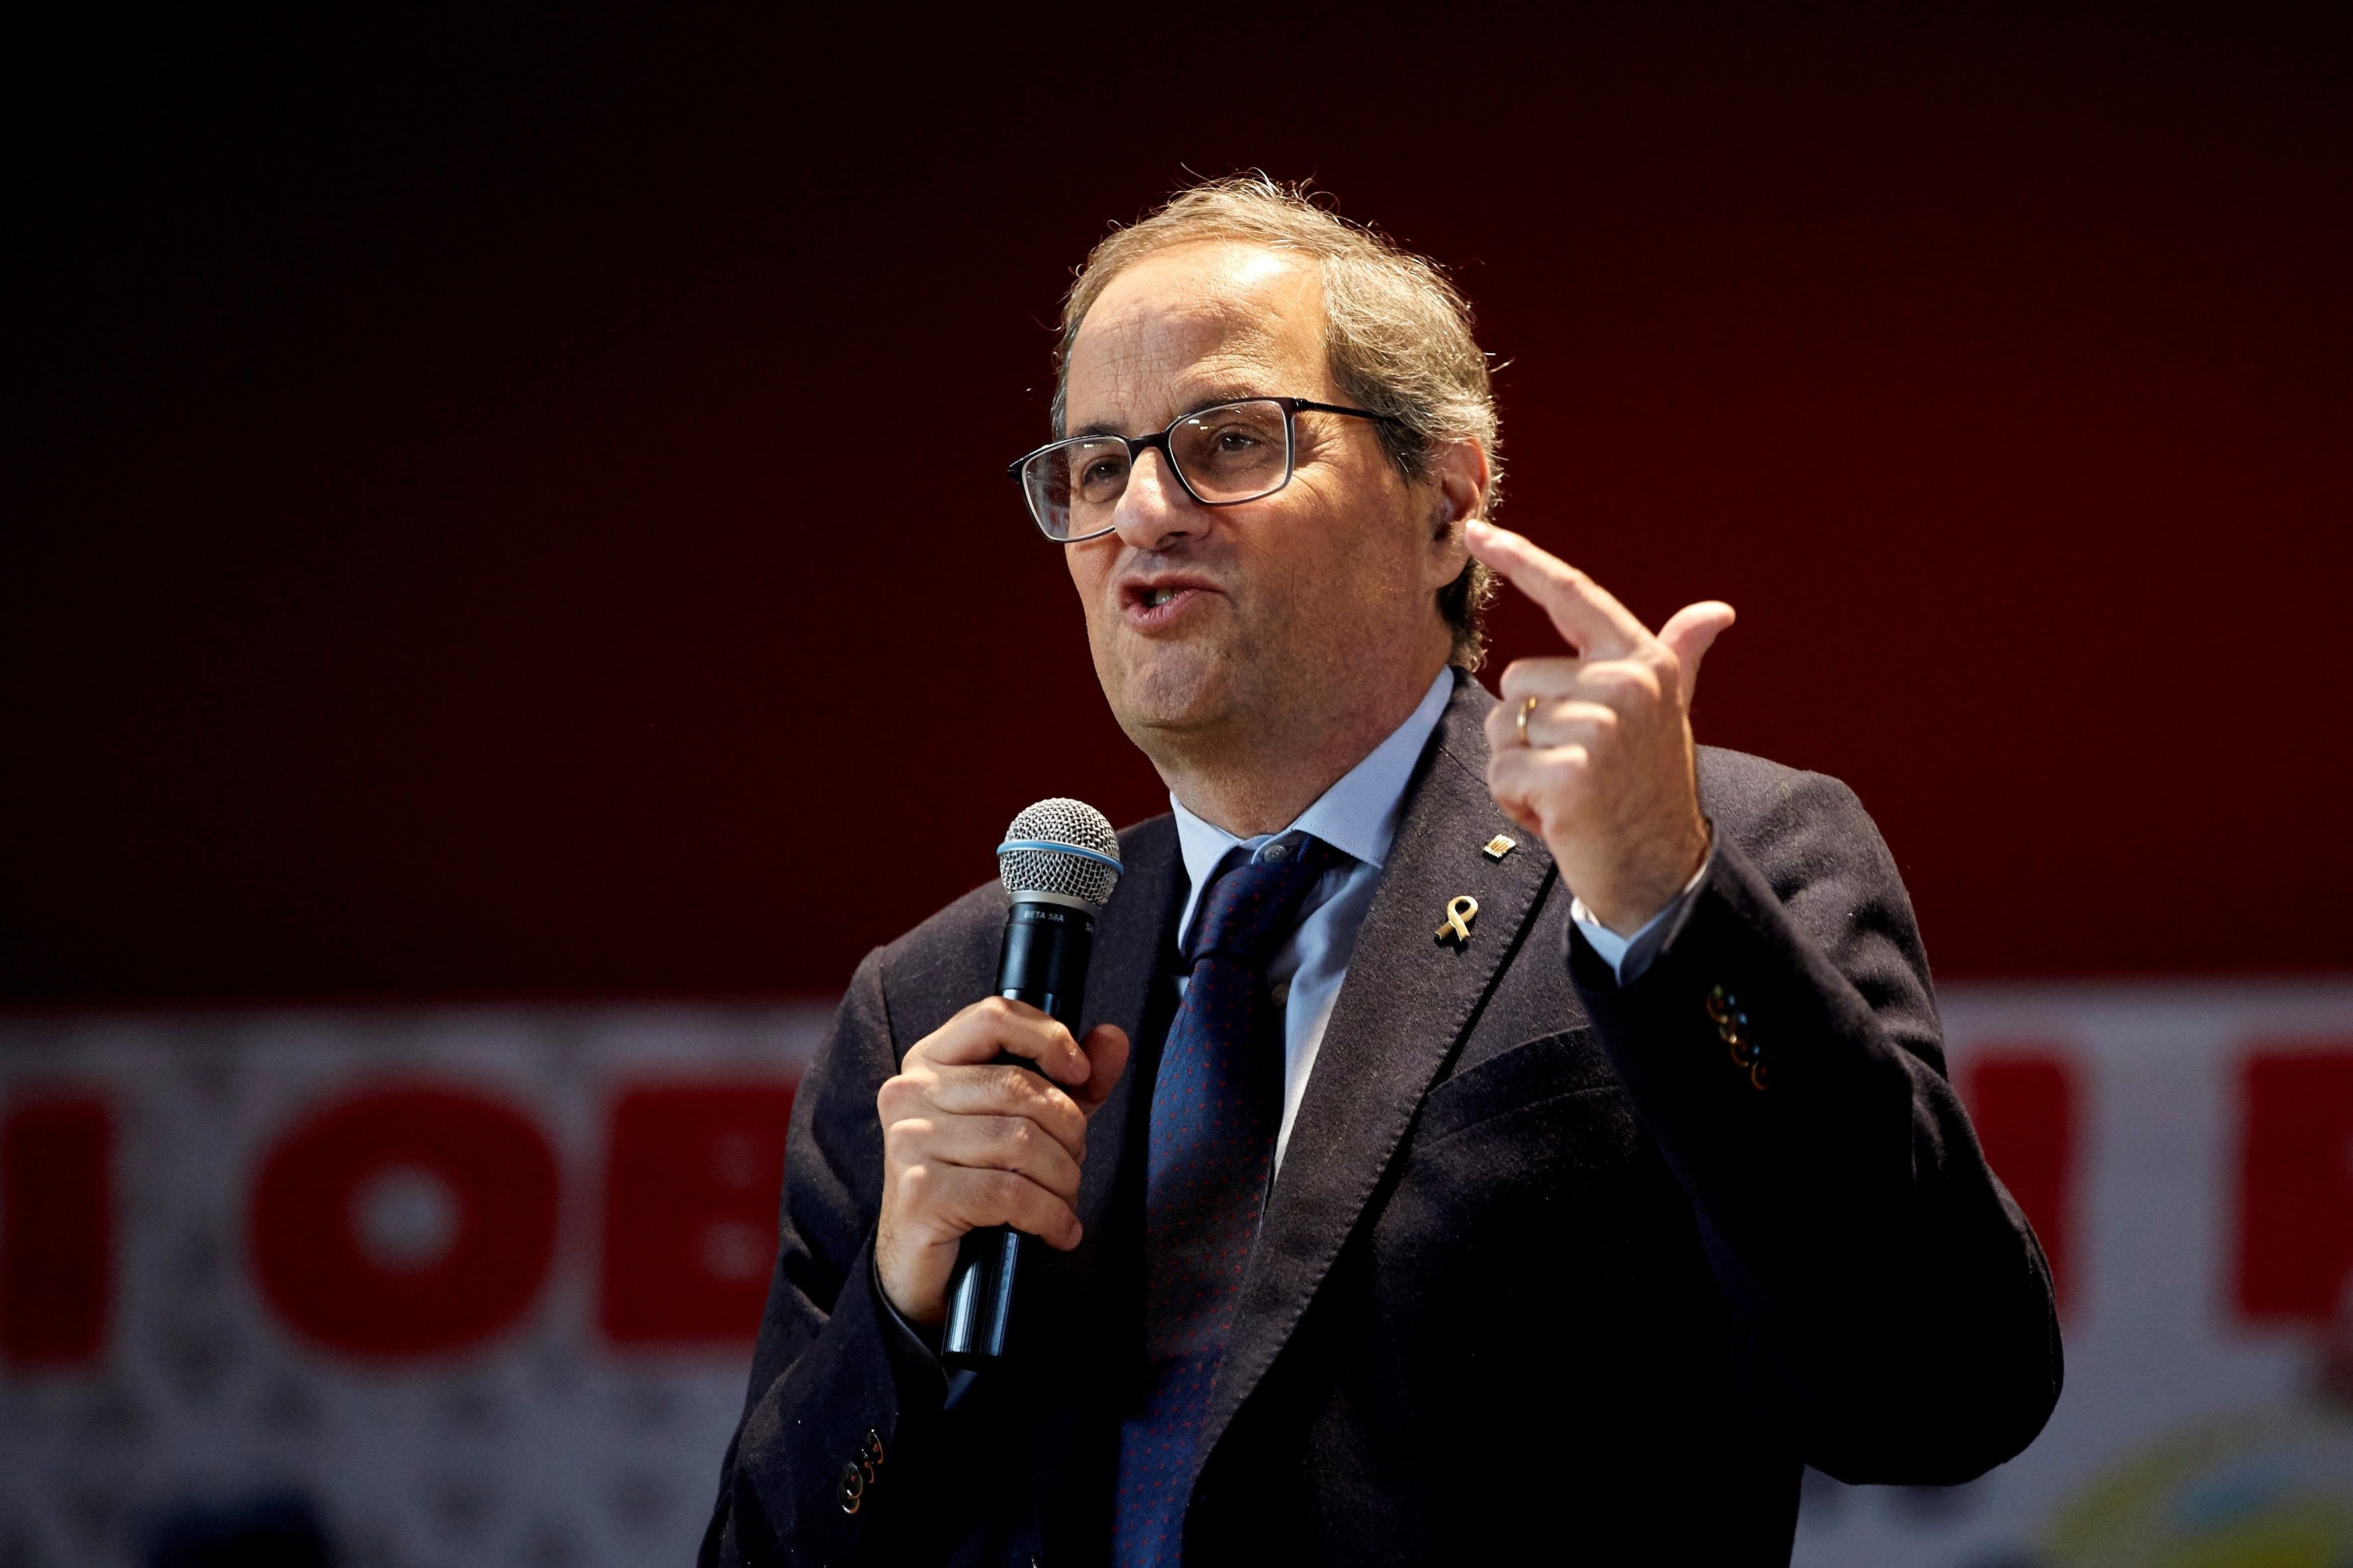 Torra, on eve of his trial: "Rather than defend myself, I will accuse the state"